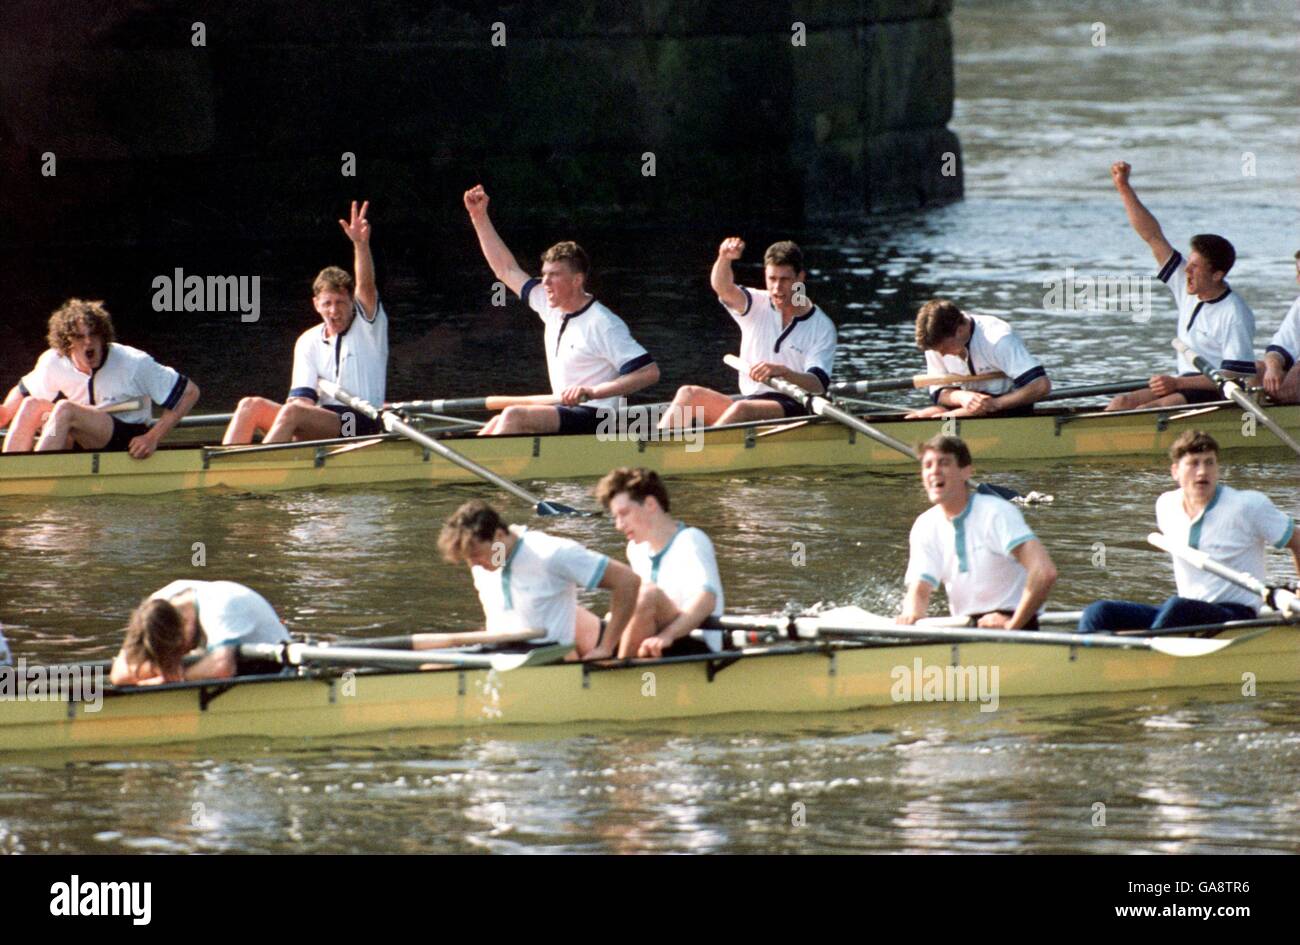 Matthew Pinsent (centre-clenched fist) leads the Oxford celebrations as the Cambridge crew collapse dejected Stock Photo